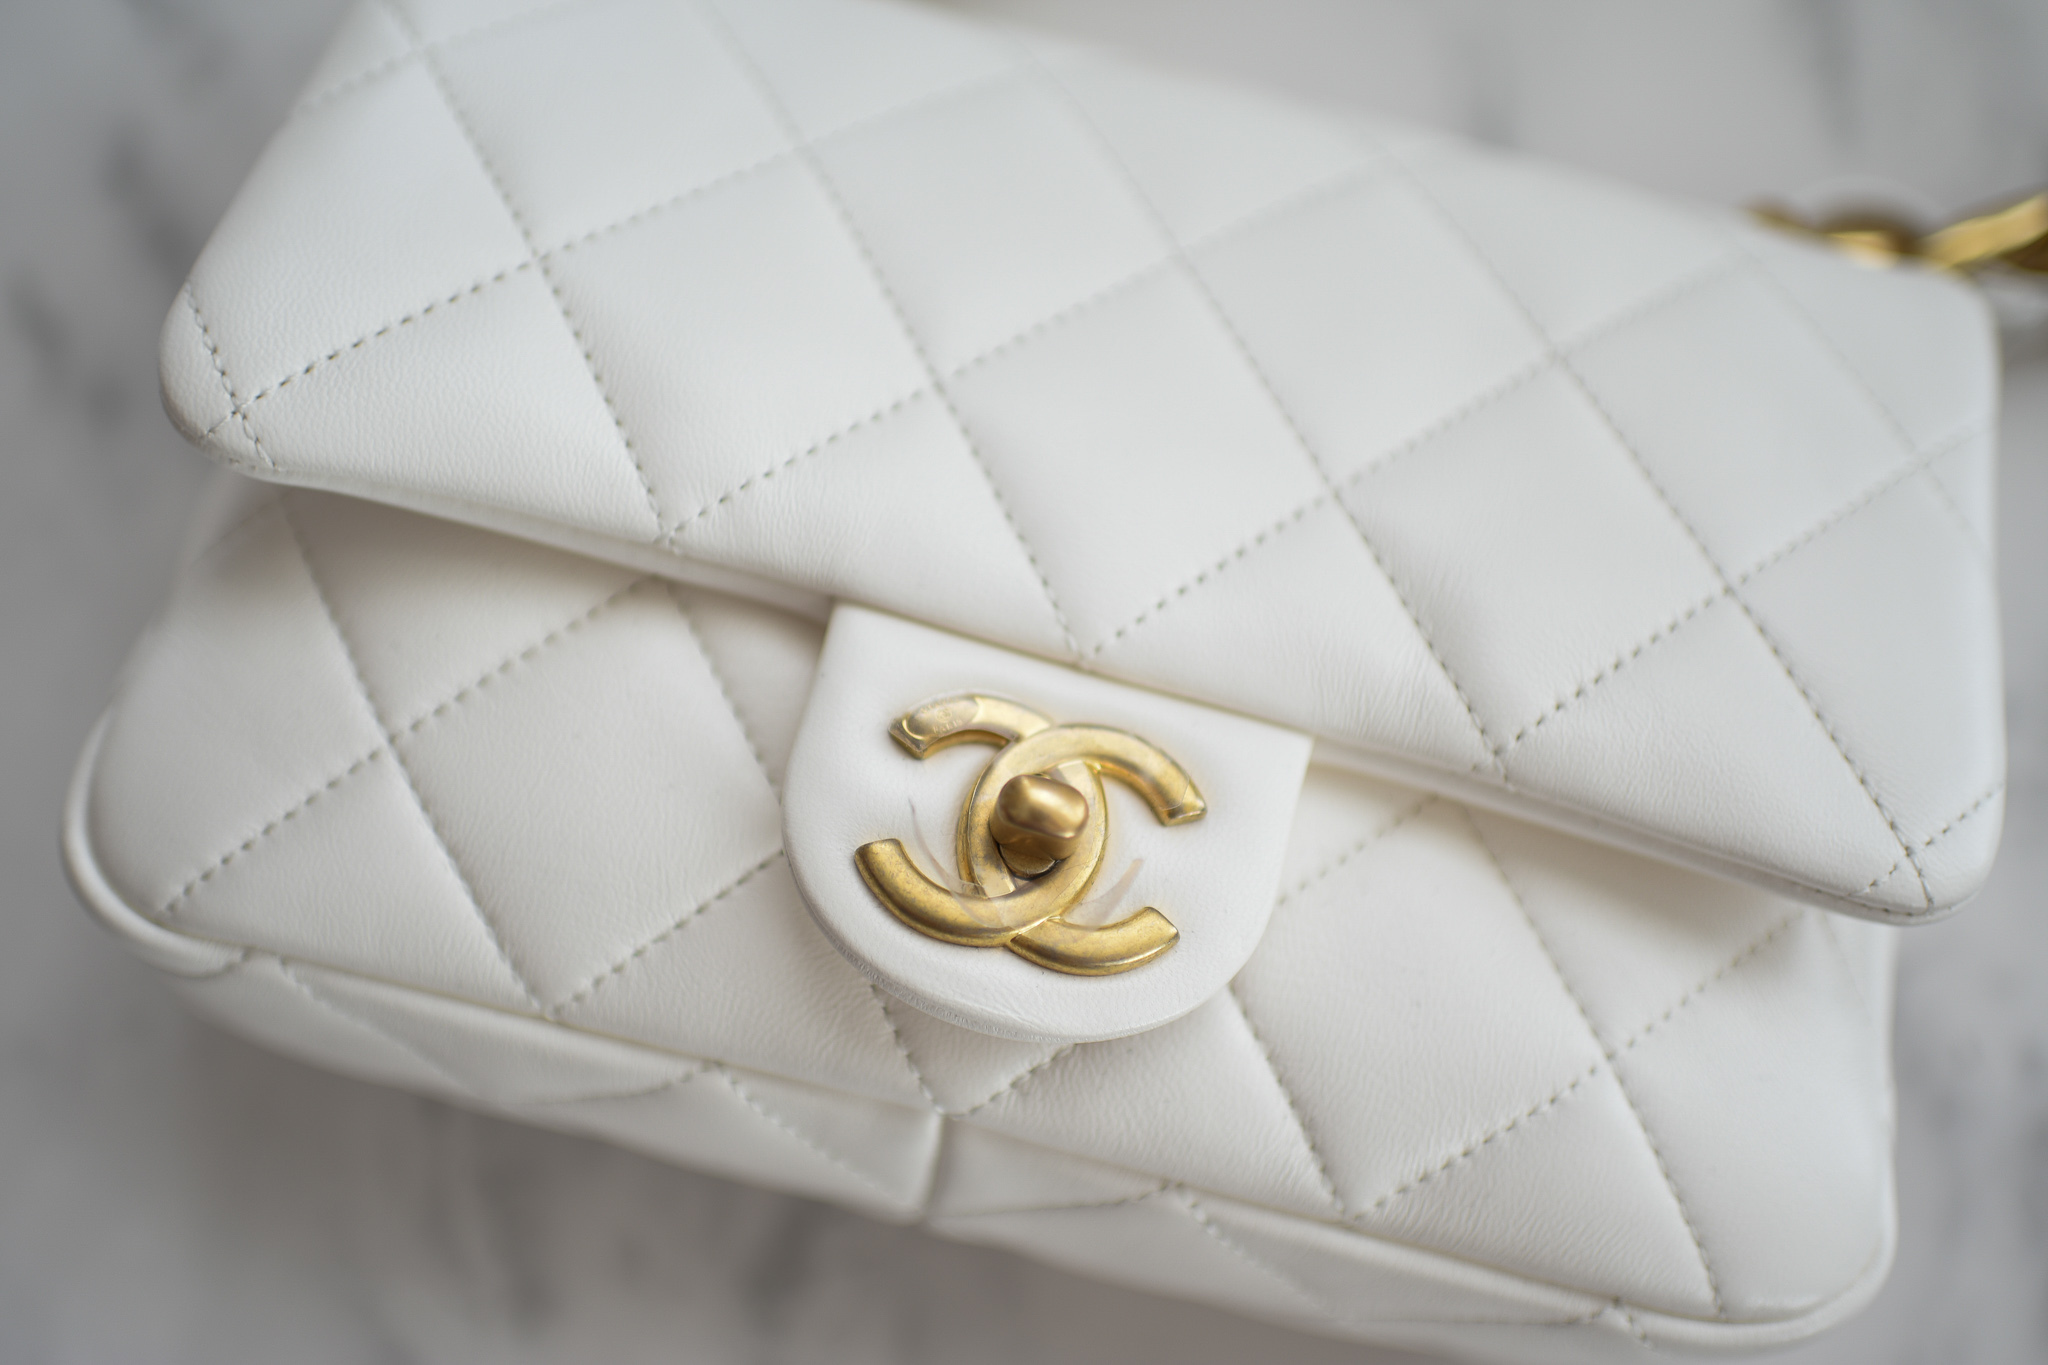 Tips for White Bags and My New Chanel – Brown Paper Doll